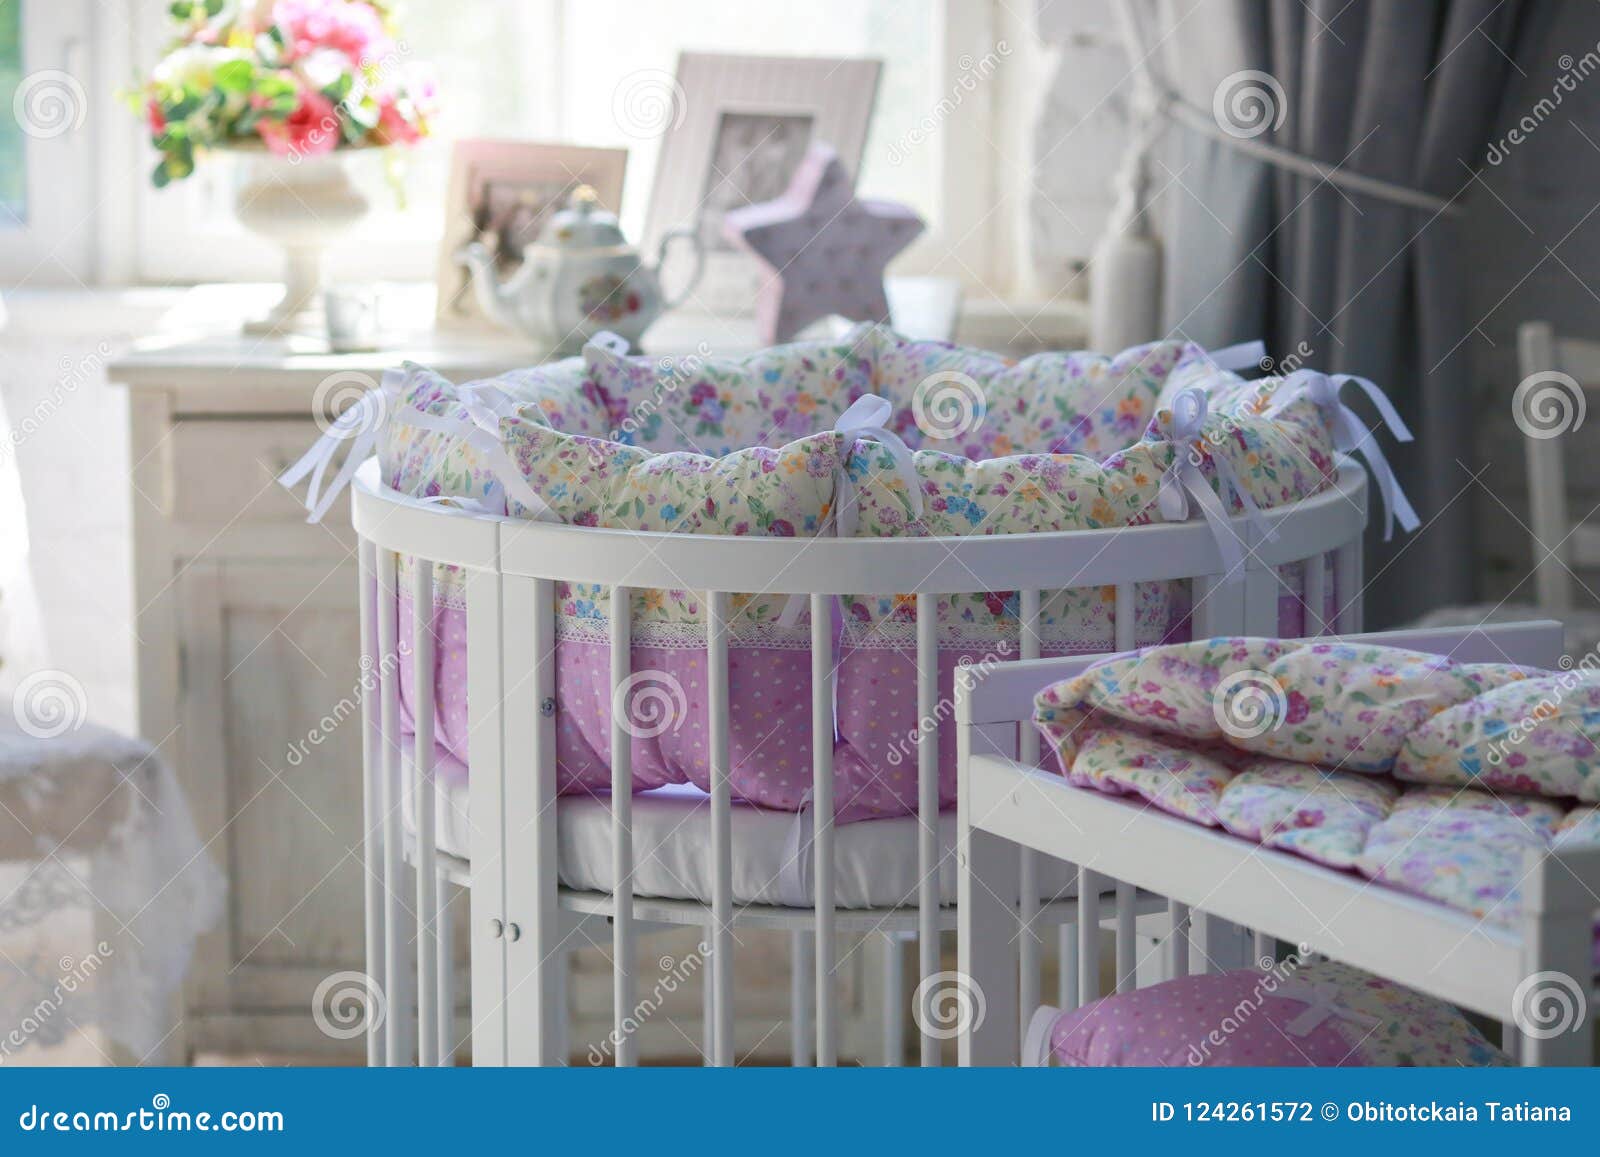 White Cribs For Babies Round Shape Stock Photo Image Of Home